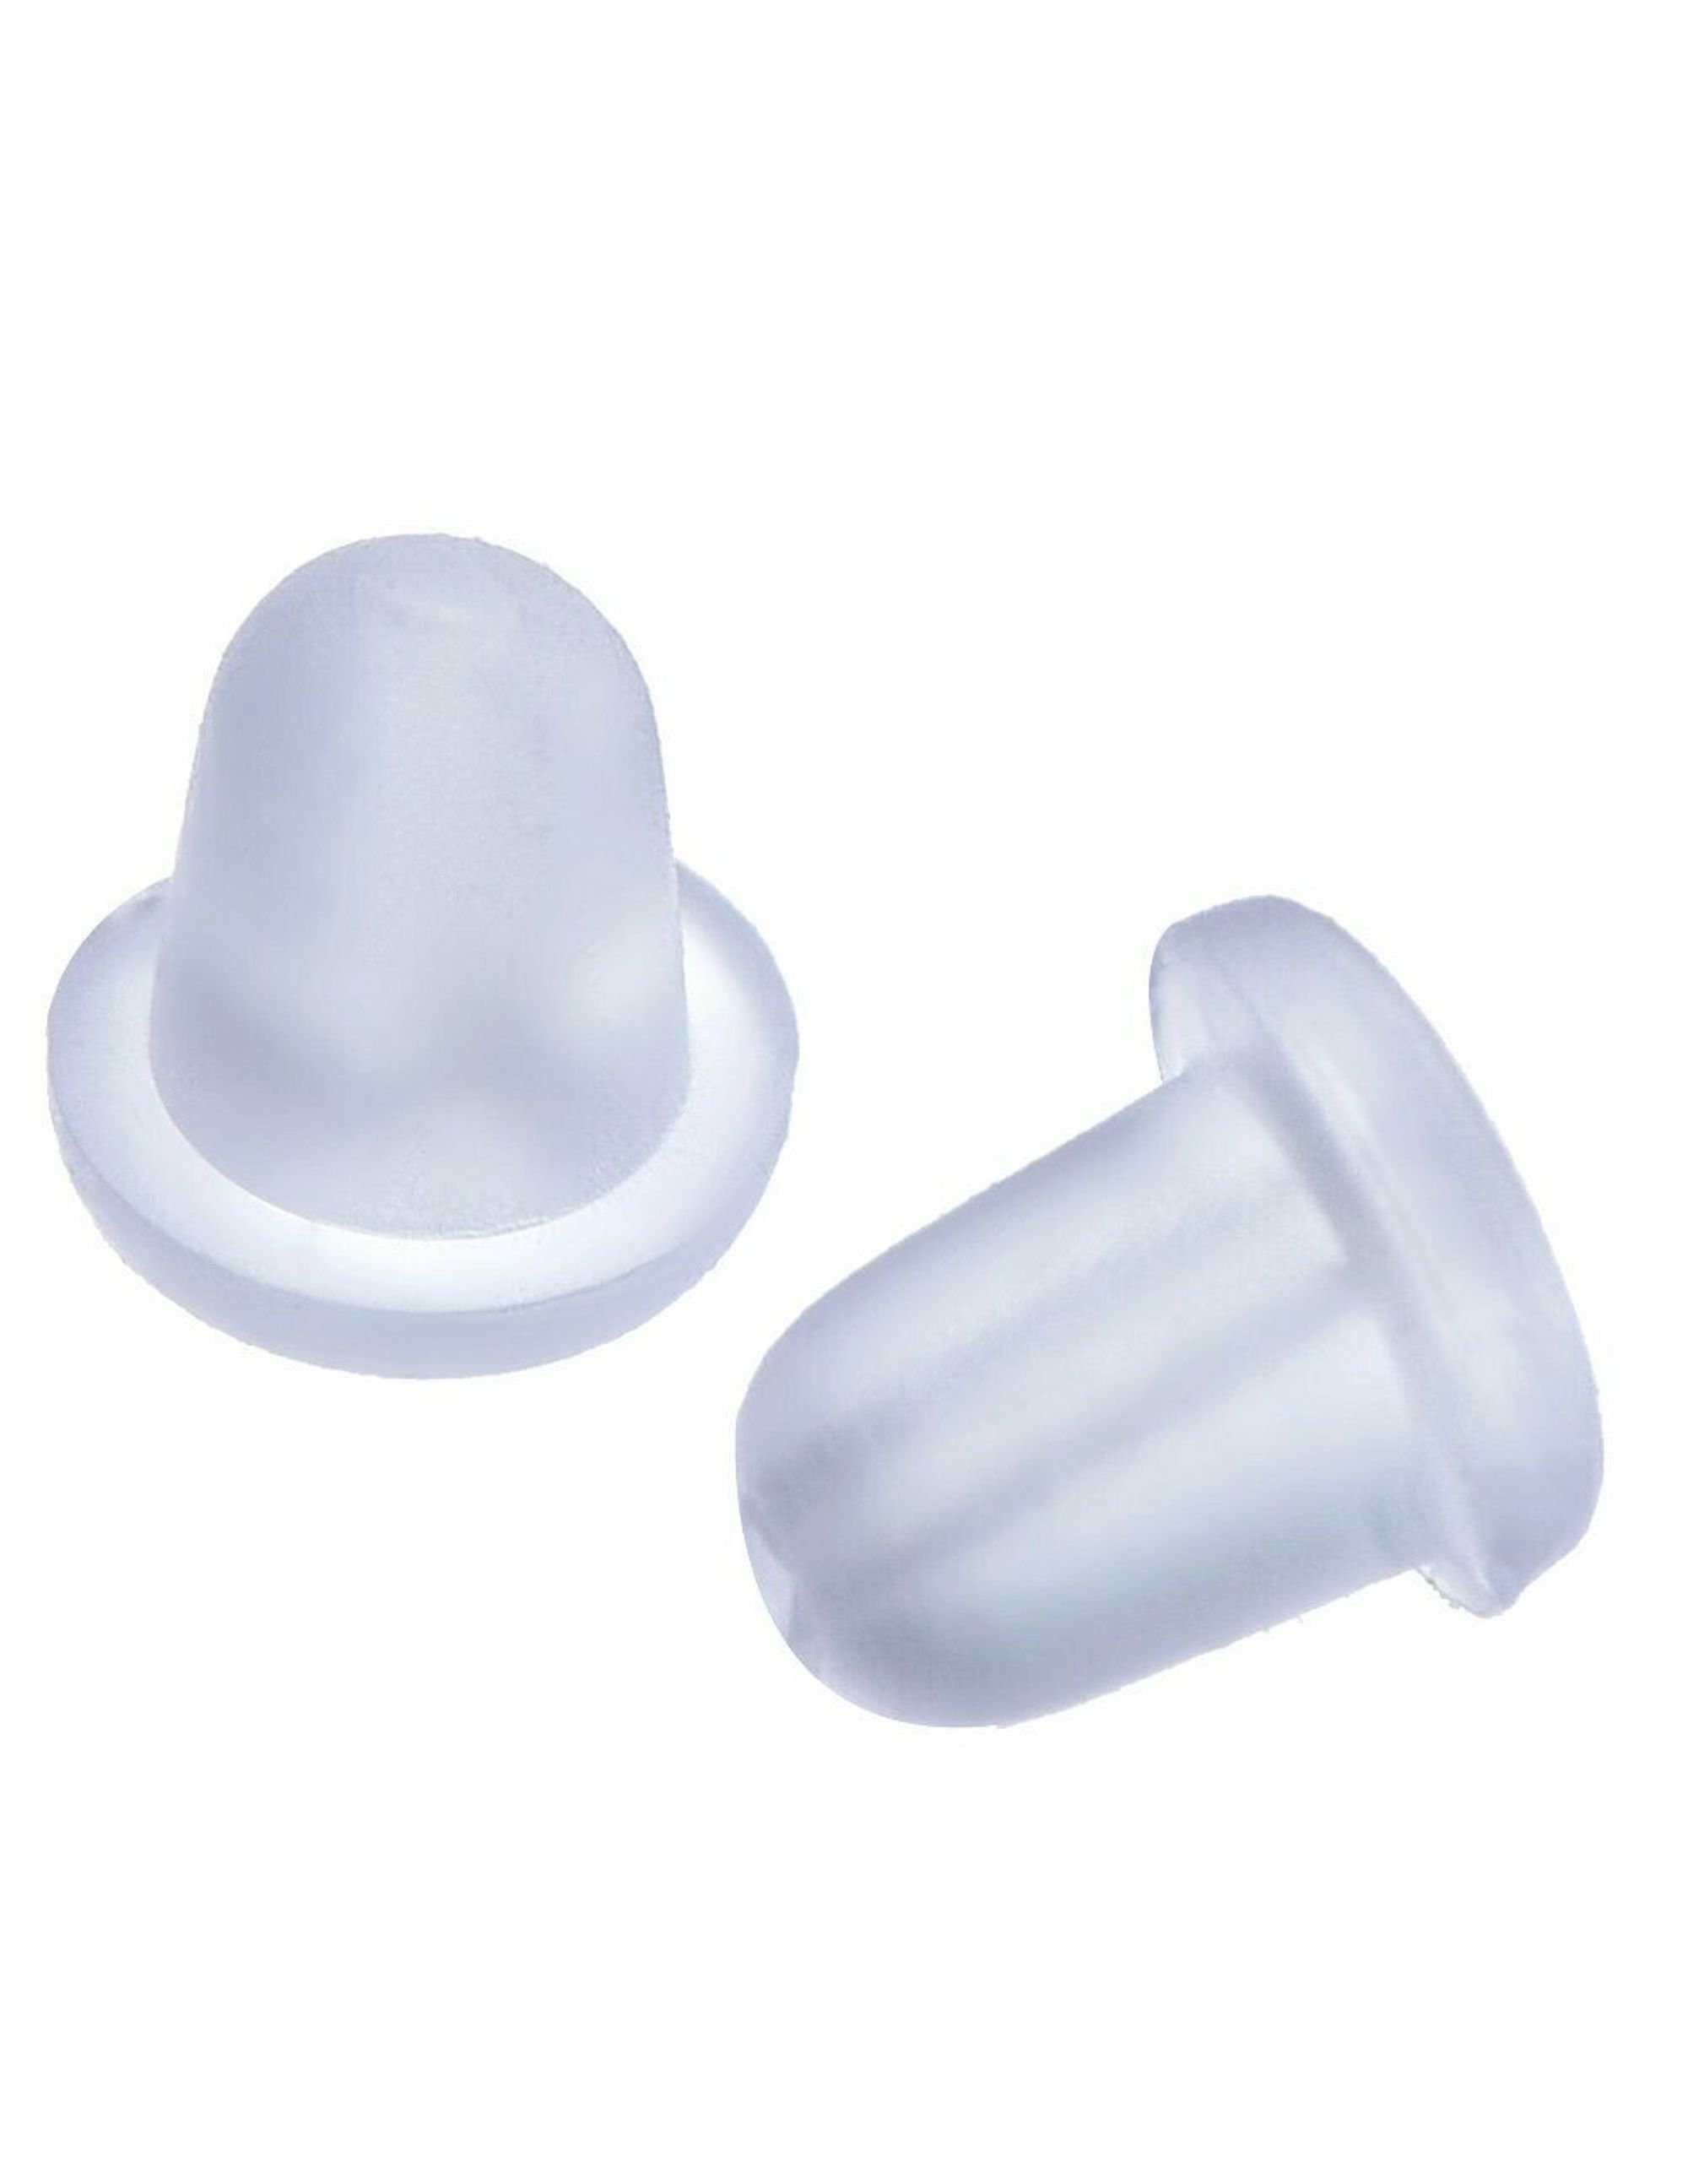 Invisible Clear Plastic Stud Earrings. Transparent in Colour for Work or  School. Acrylic Material Post Silicone Back. Tiny Clear Nylon Stud 